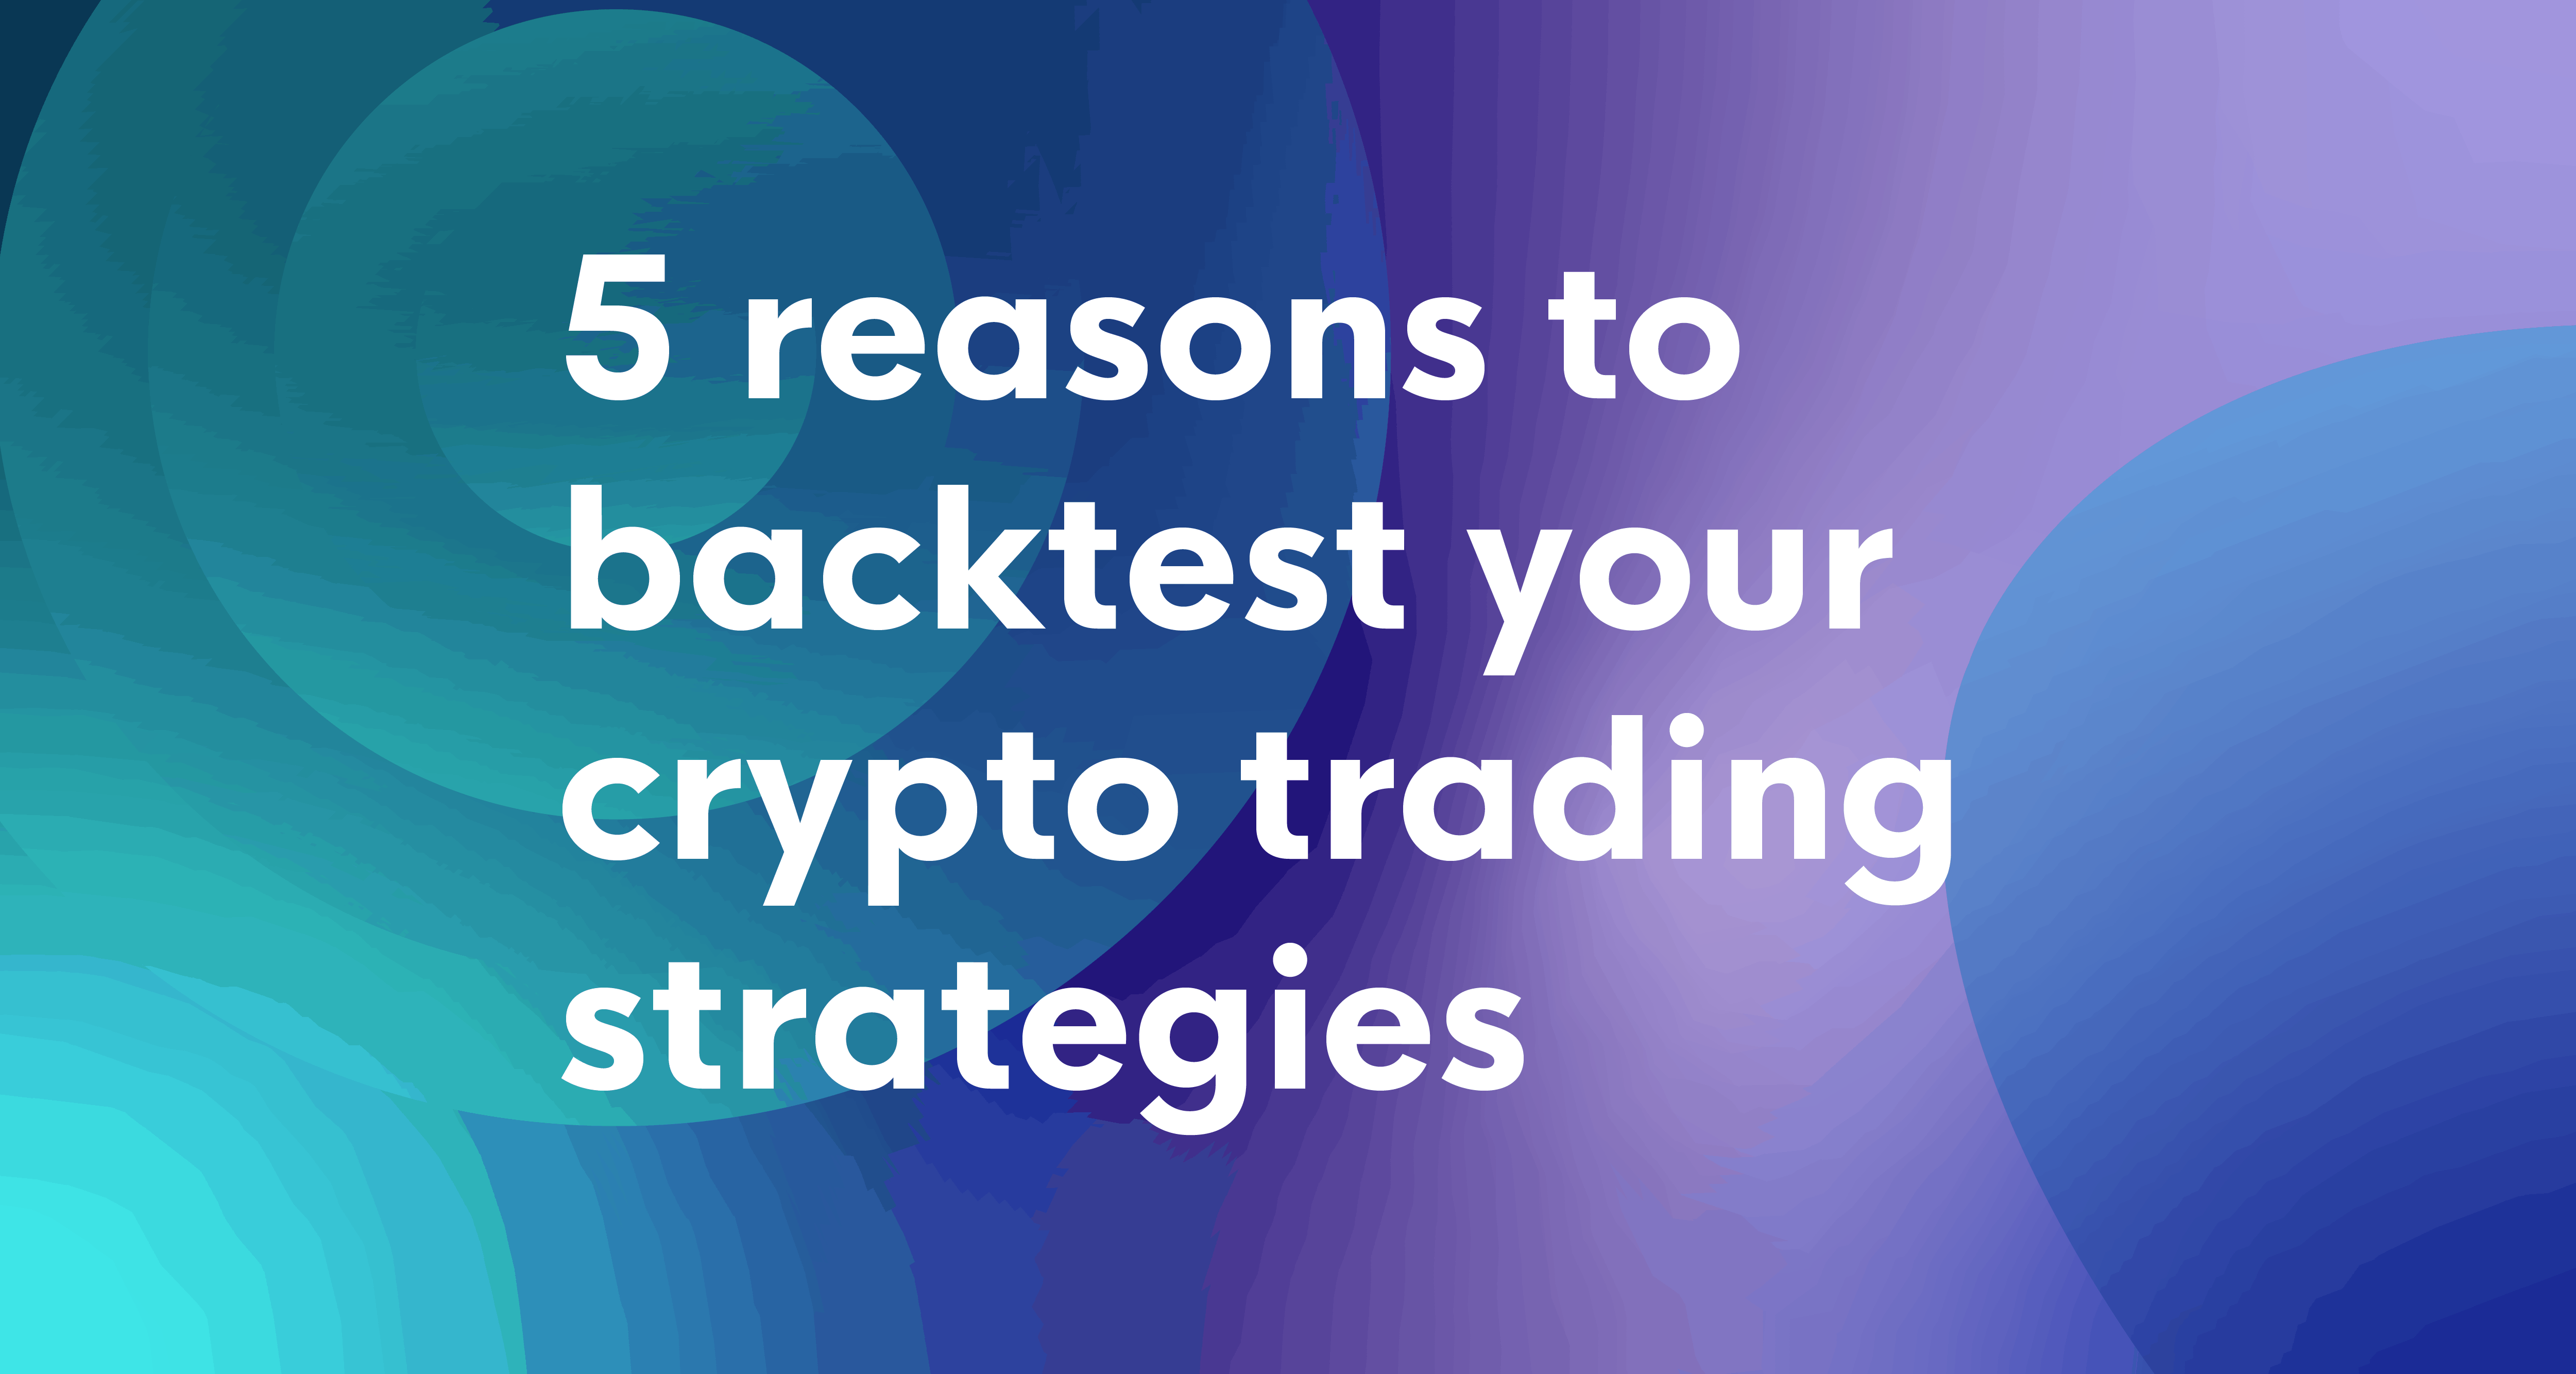 5 reasons to backtest your crypto strategies optimized